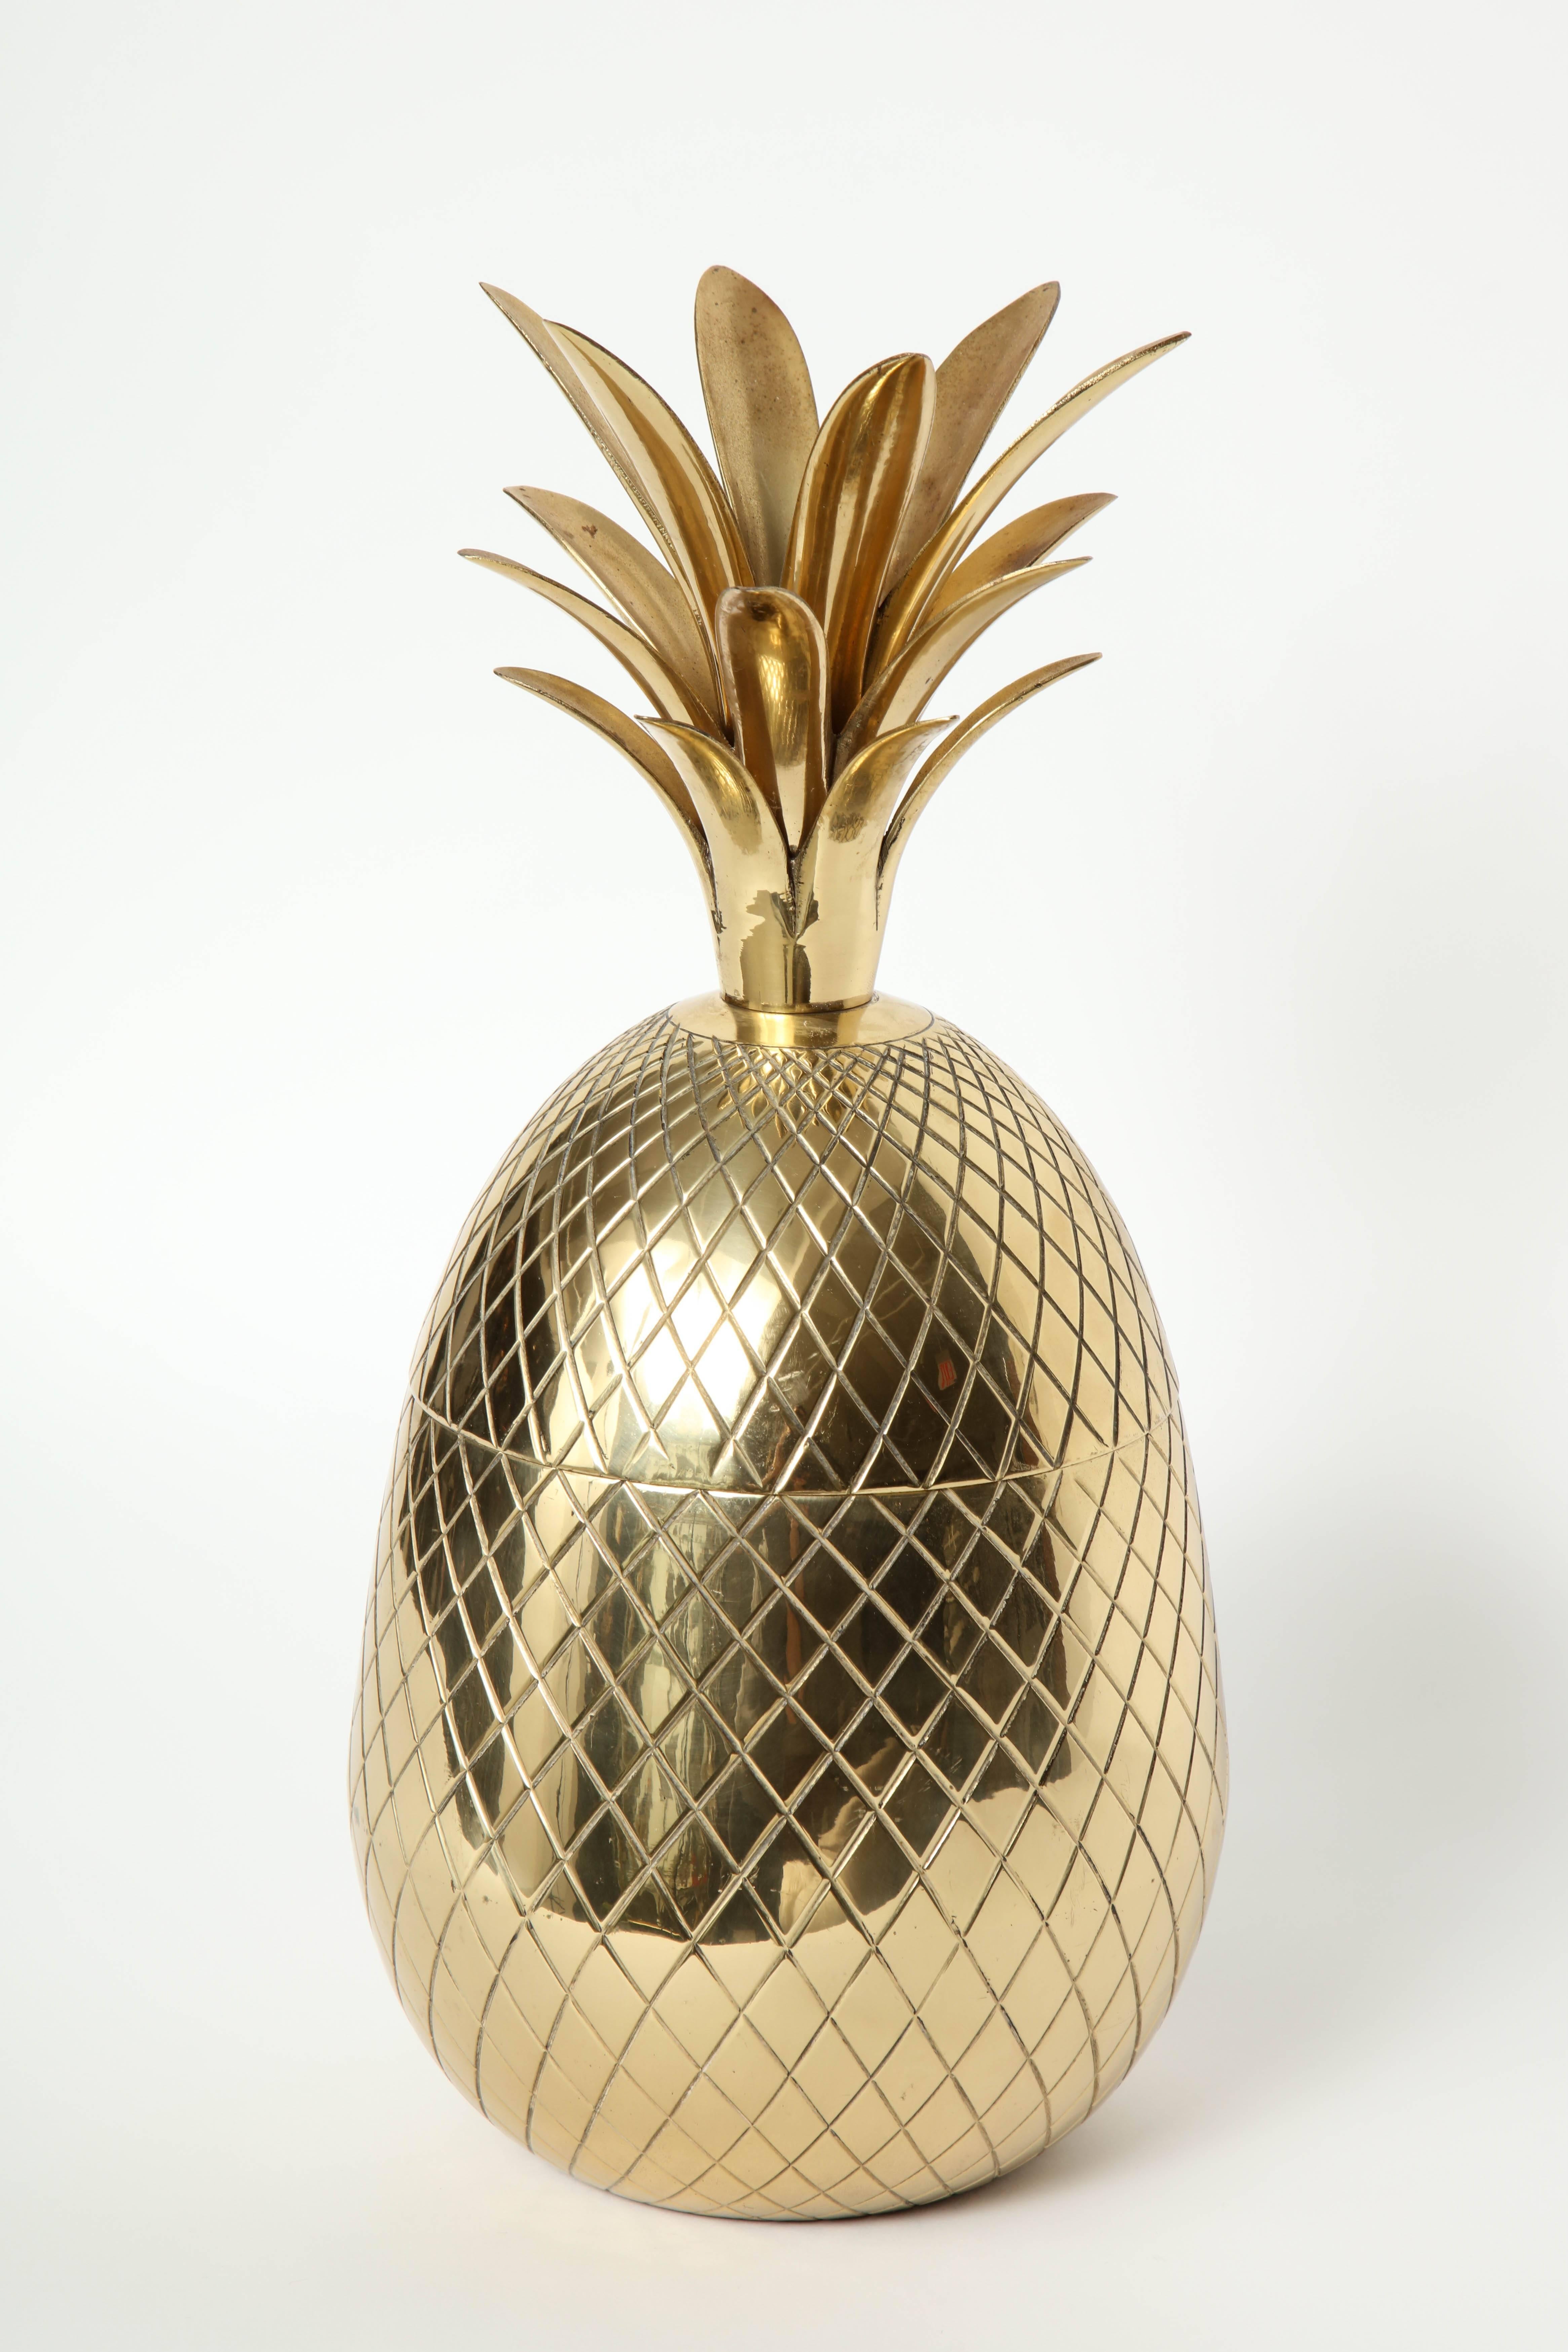 Midcentury French brass ice bucket with an Ovoid shape with an engraved trellis pattern.